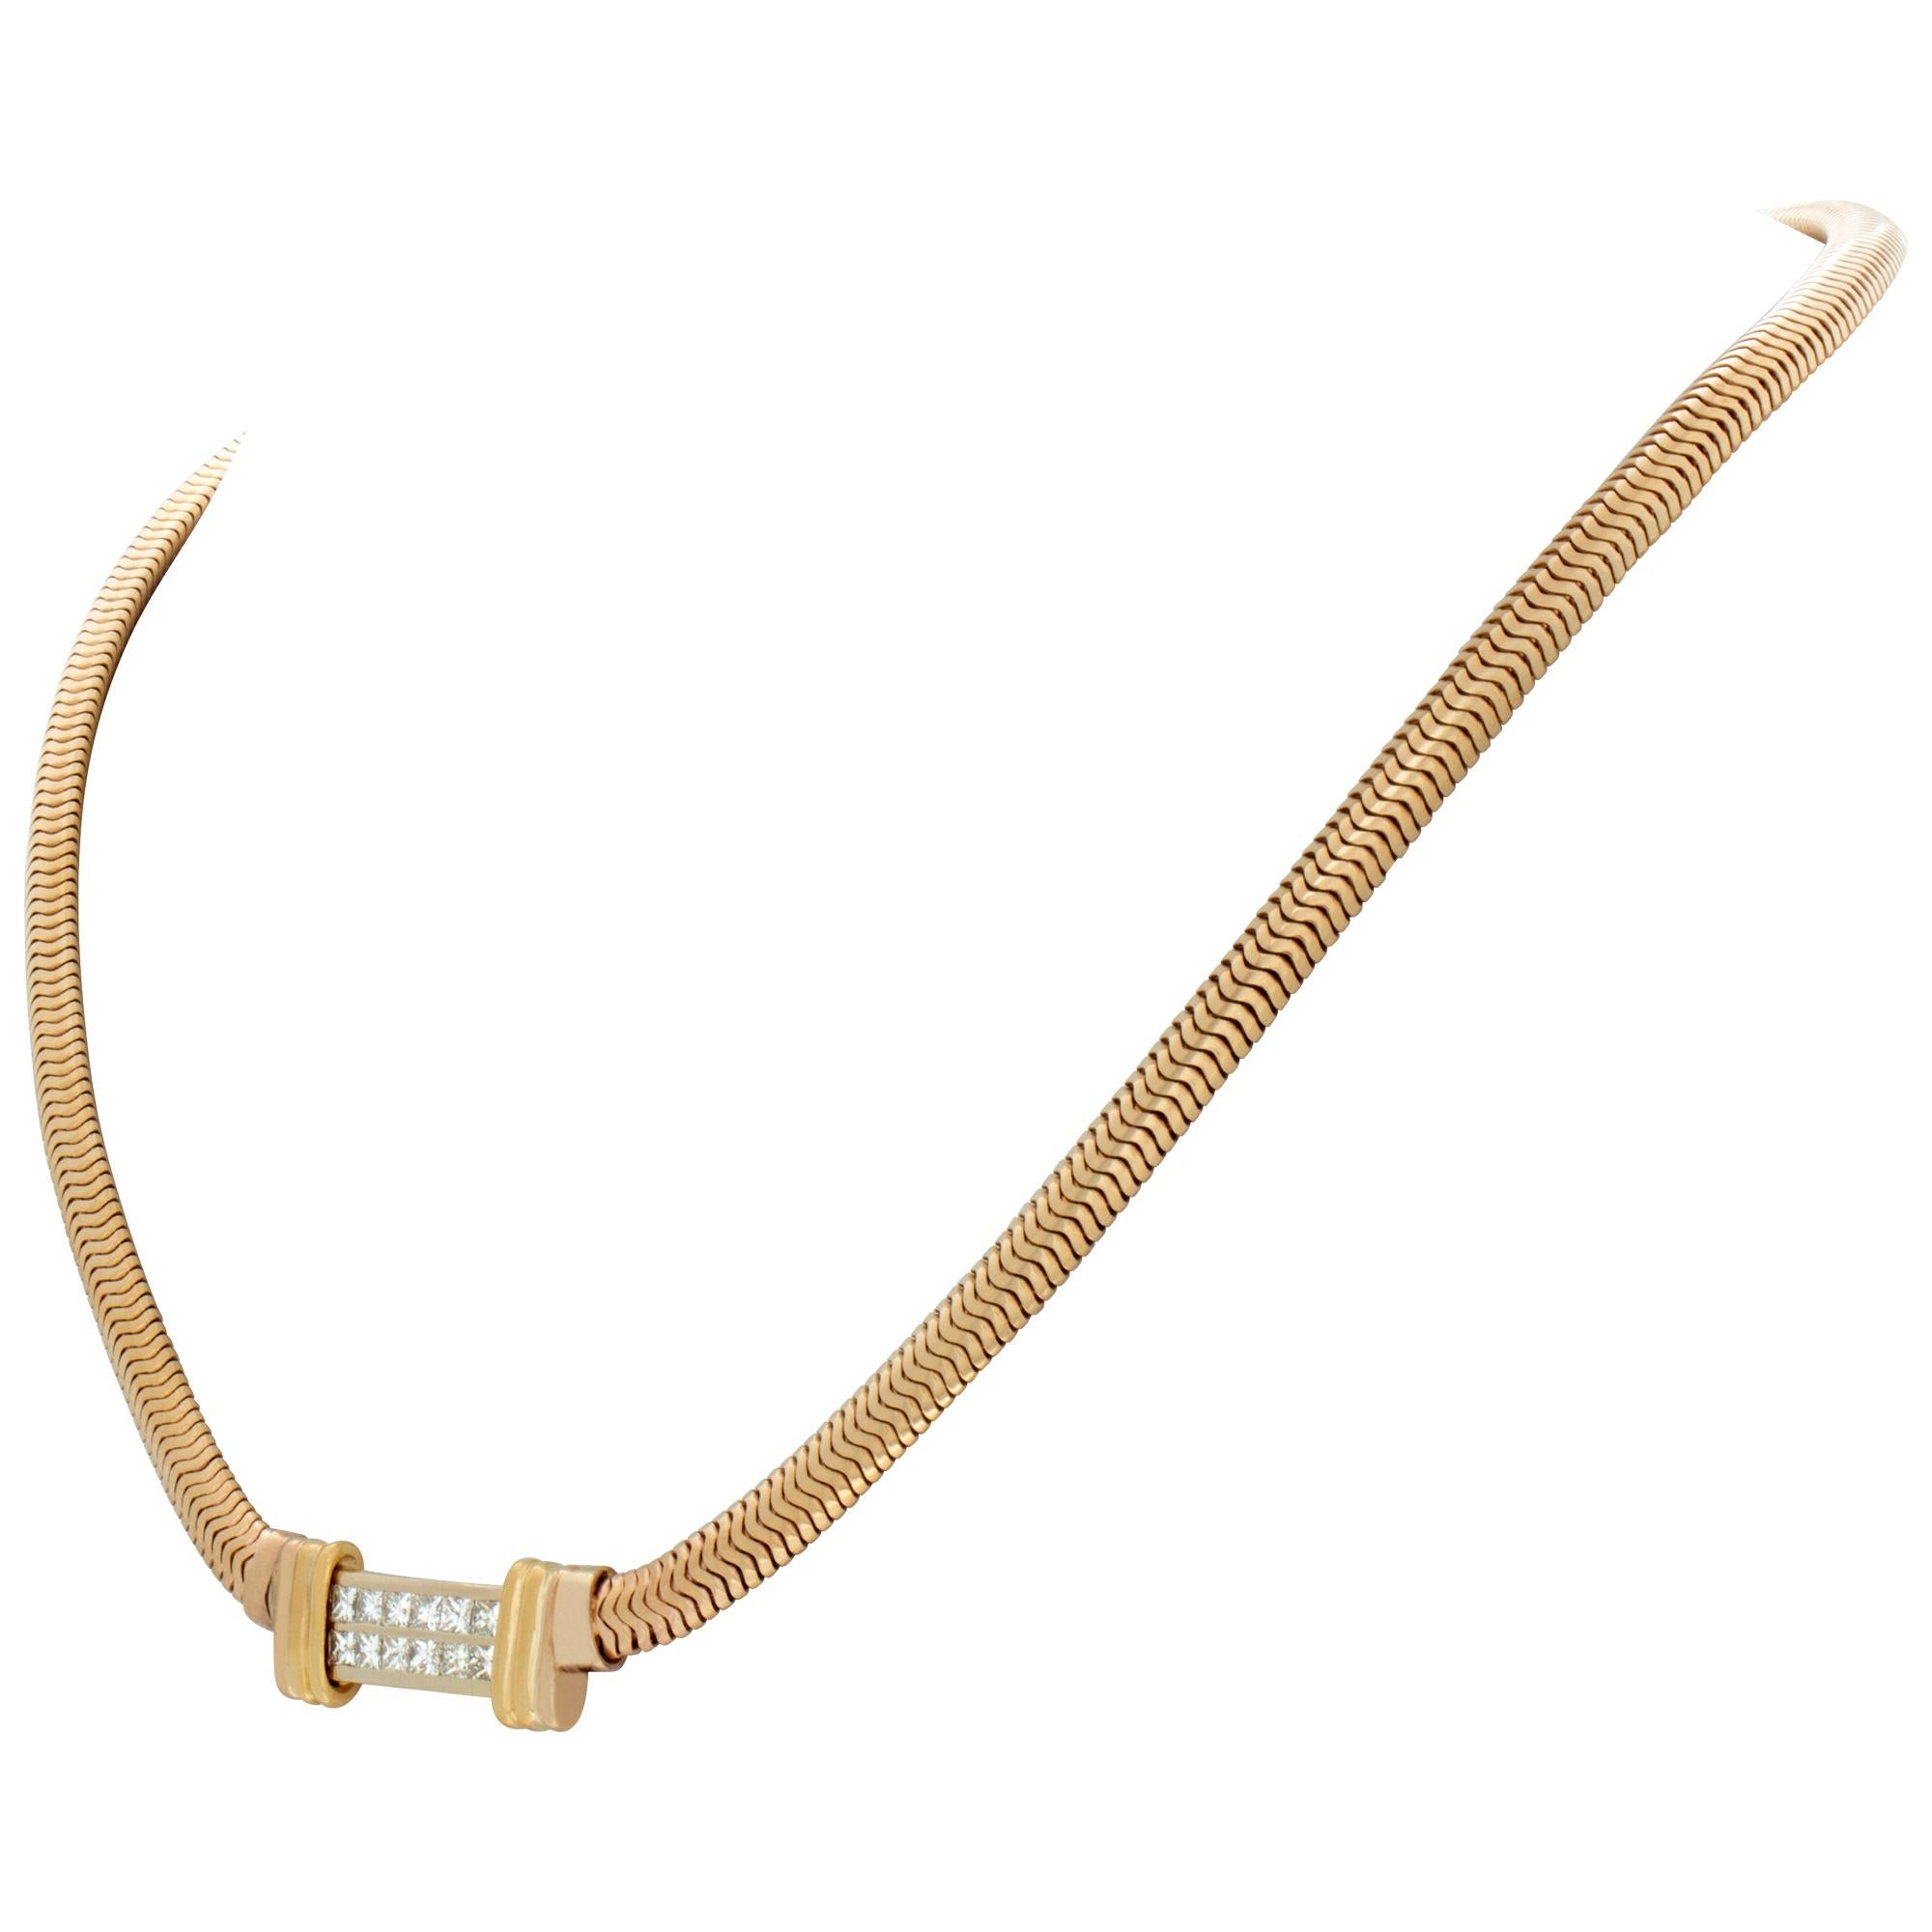 Snake link necklace in 14k yellow gold with a double row of approximately 1.20 carats in invisible set princess cut diamonds. 17 inch length.
